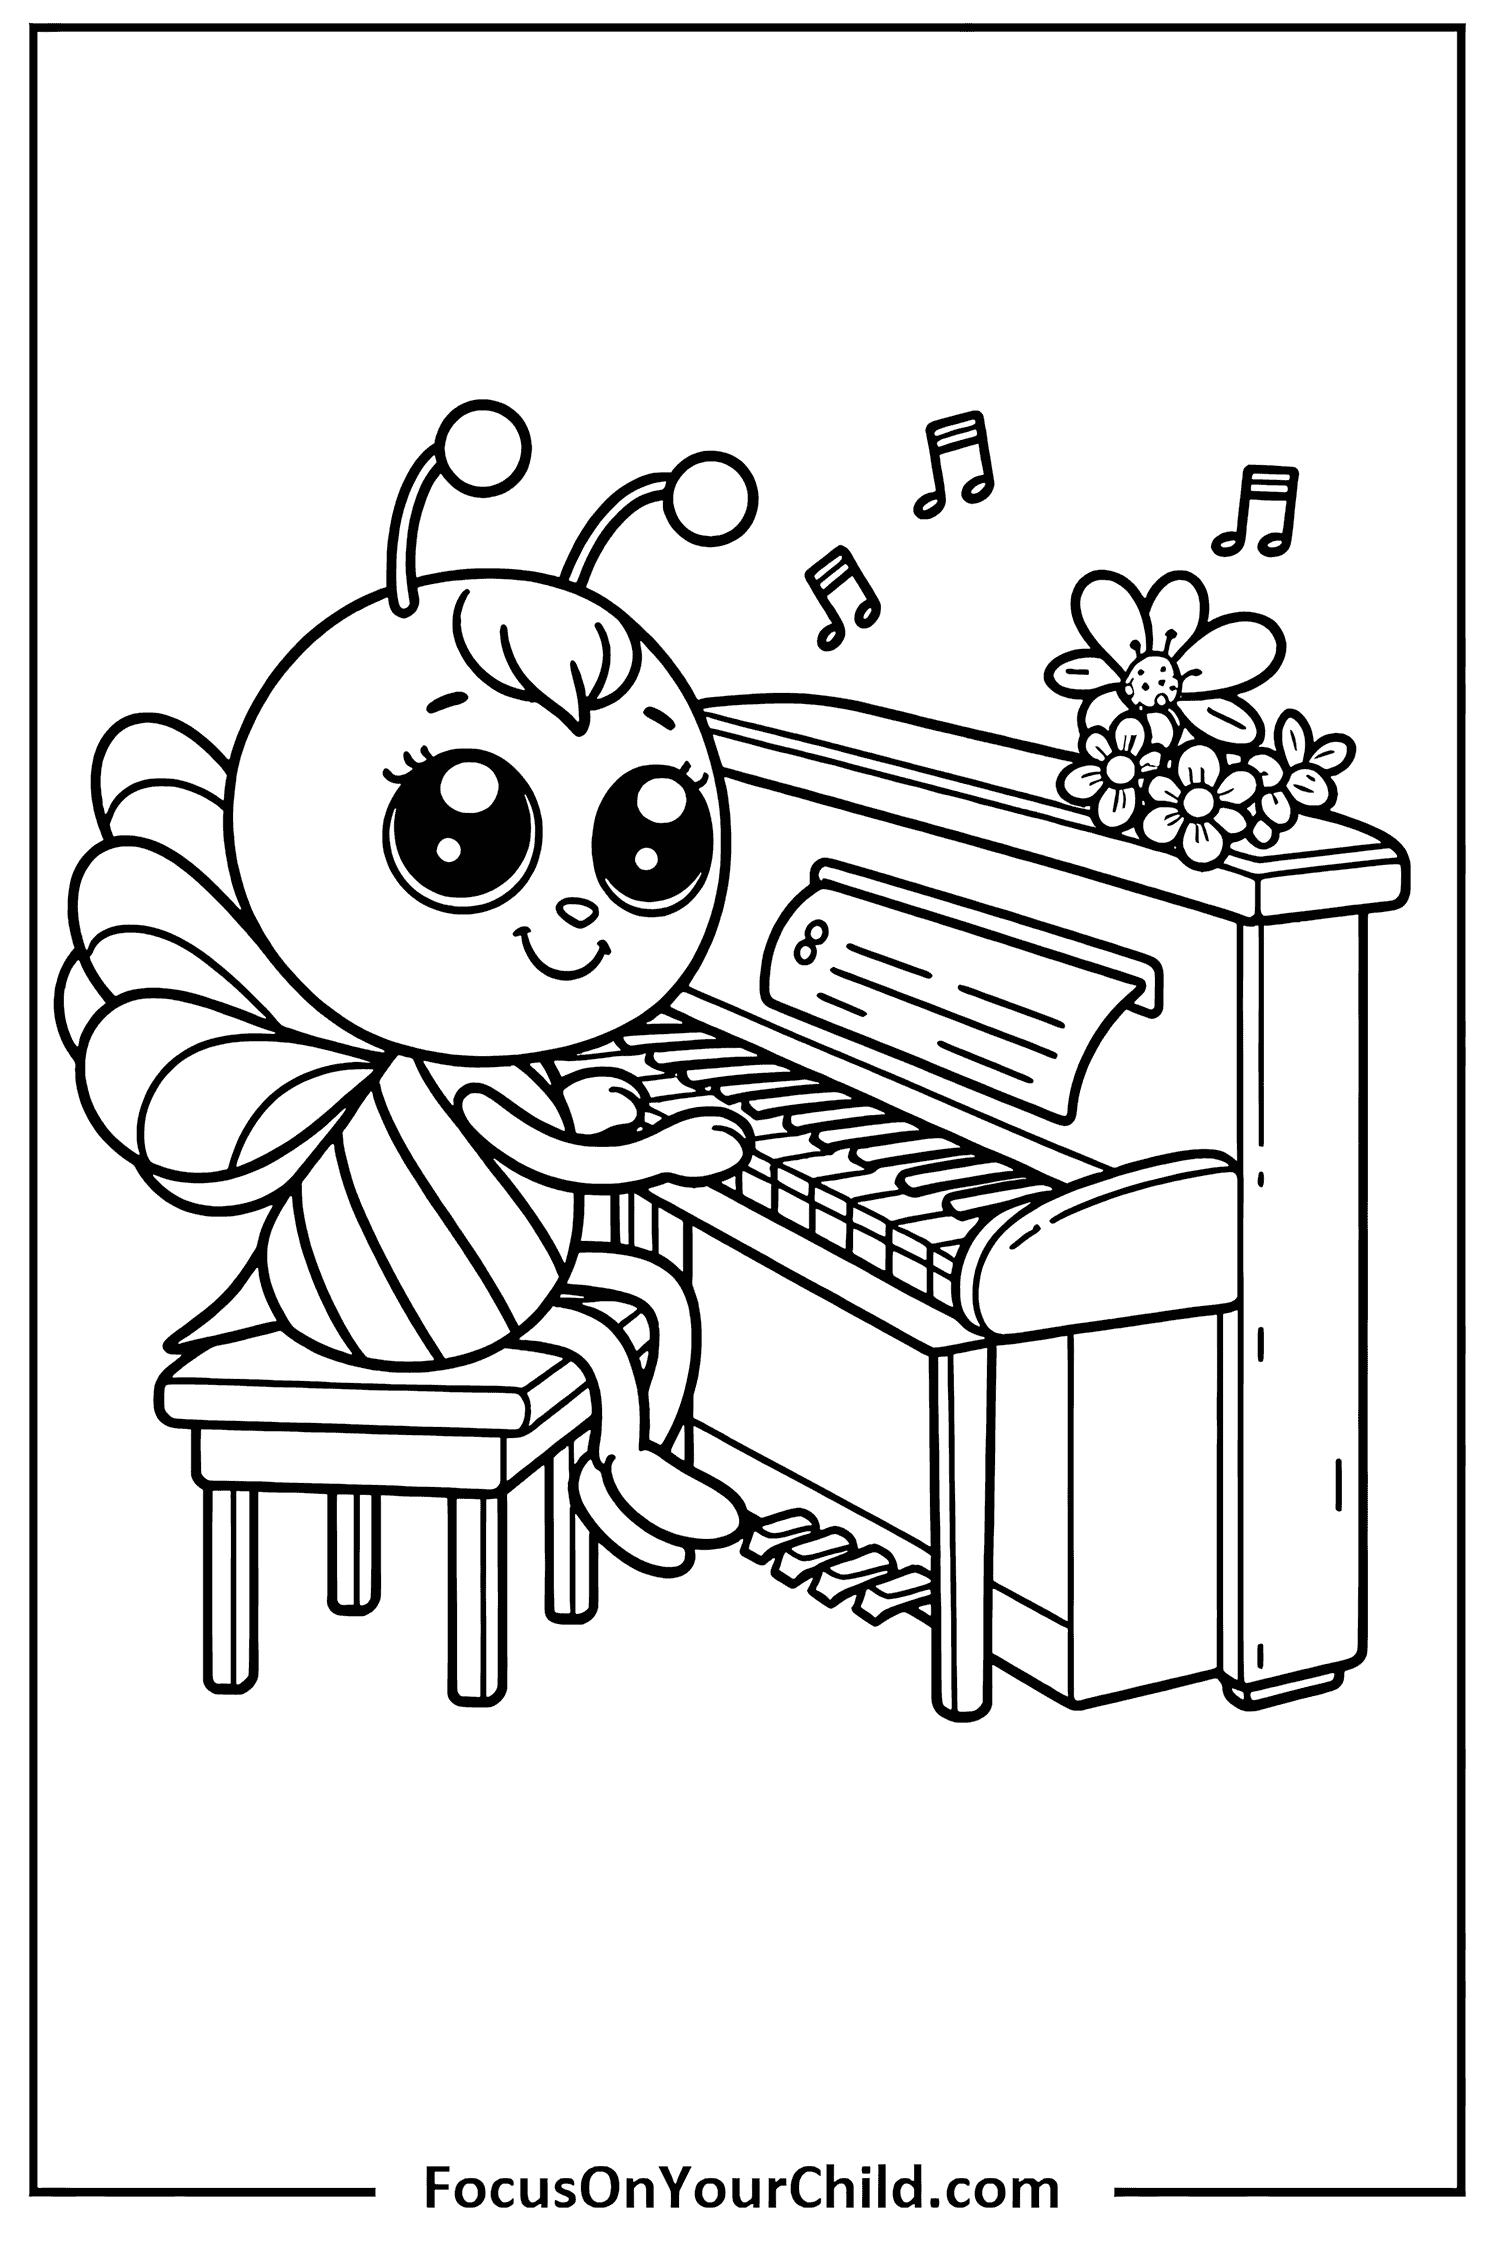 Bee Playing Piano Cartoon Illustration for Childrens Coloring Page.